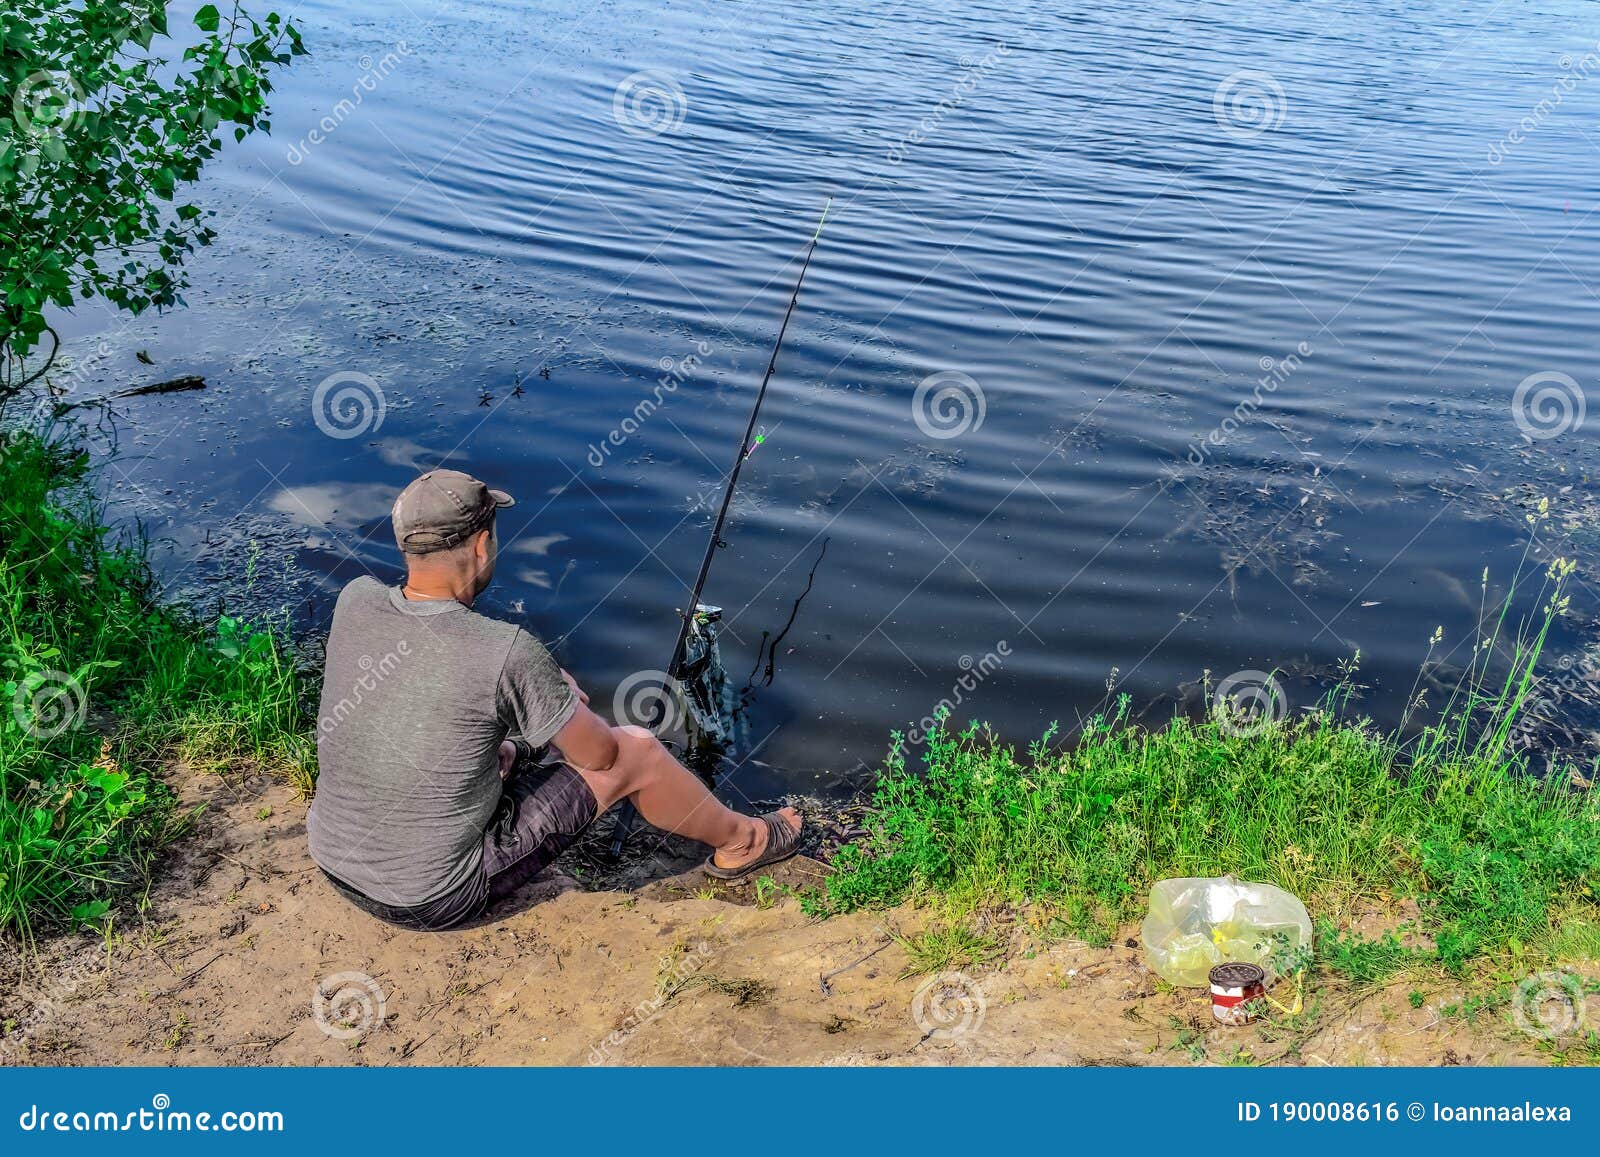 Fisherman Sitting on the Ground Fishing in a Pond - Top View. Young Adult  Man with Fishing Rod Fishing from the Shore on a Stock Photo - Image of  fish, copy: 190008616